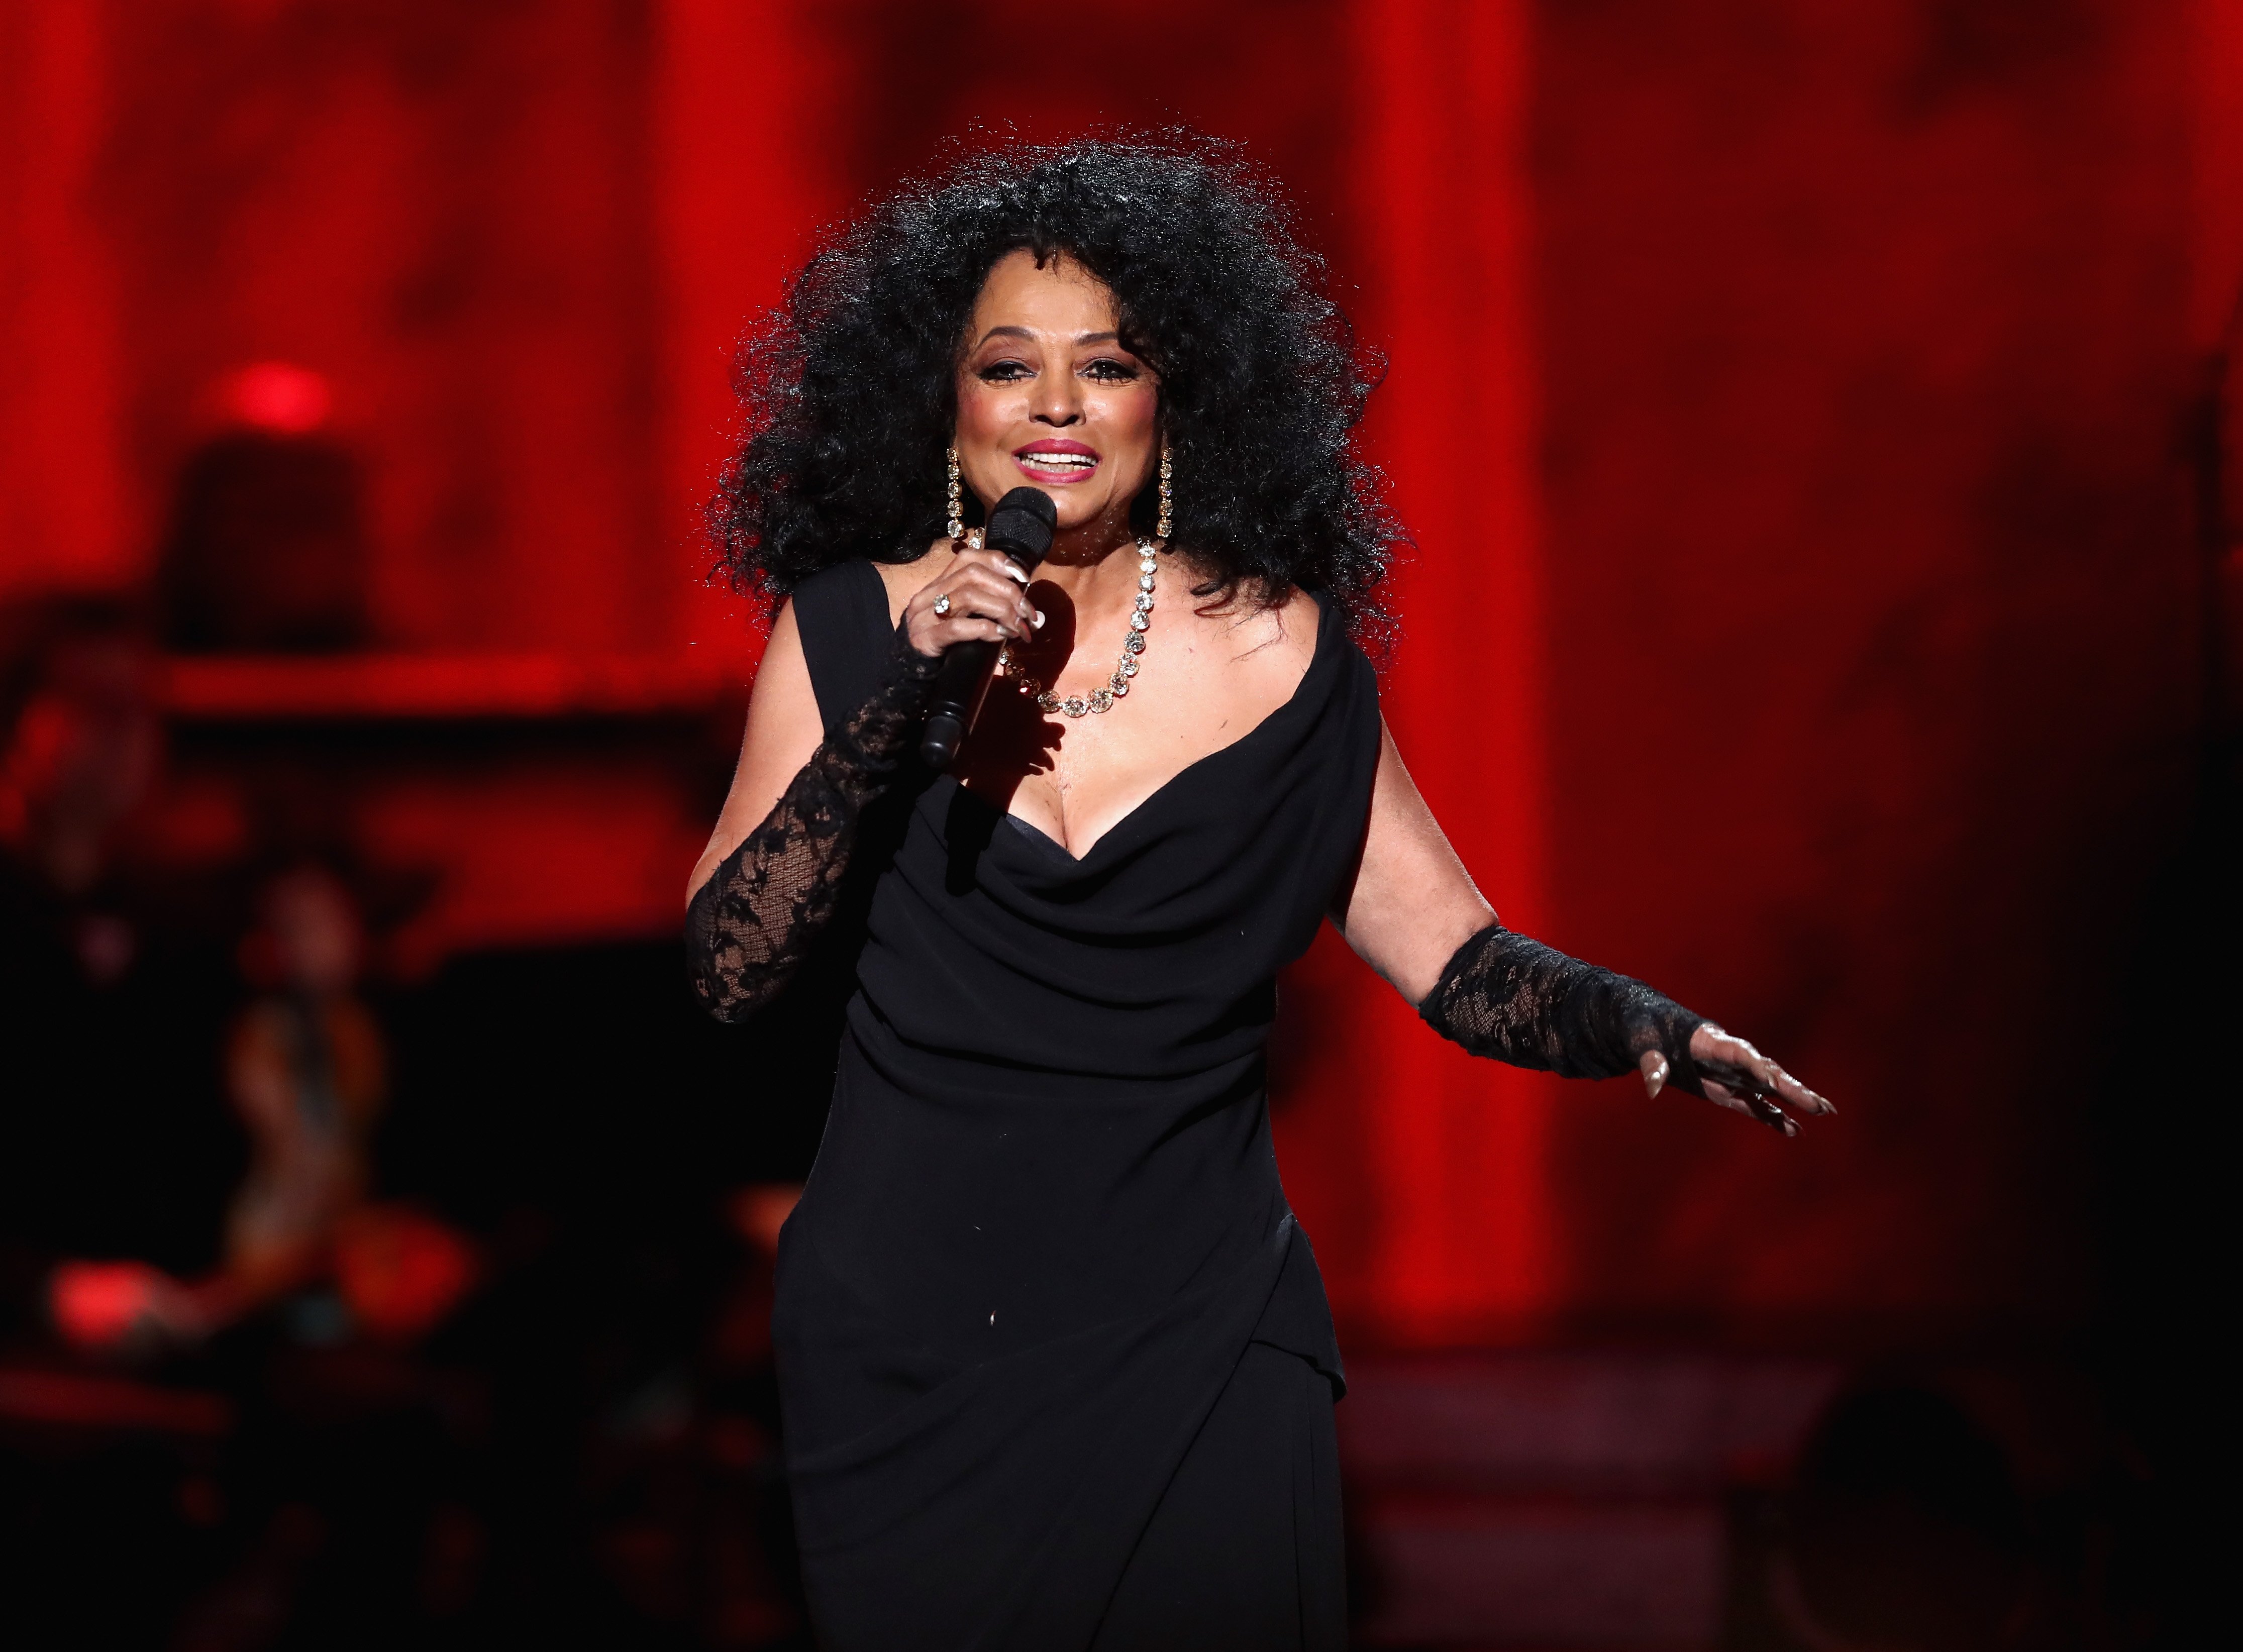 Diana Ross performs onstage during "Motown 60: A GRAMMY Celebration" at Microsoft Theater on February 12, 2019. | Photo: Getty Images